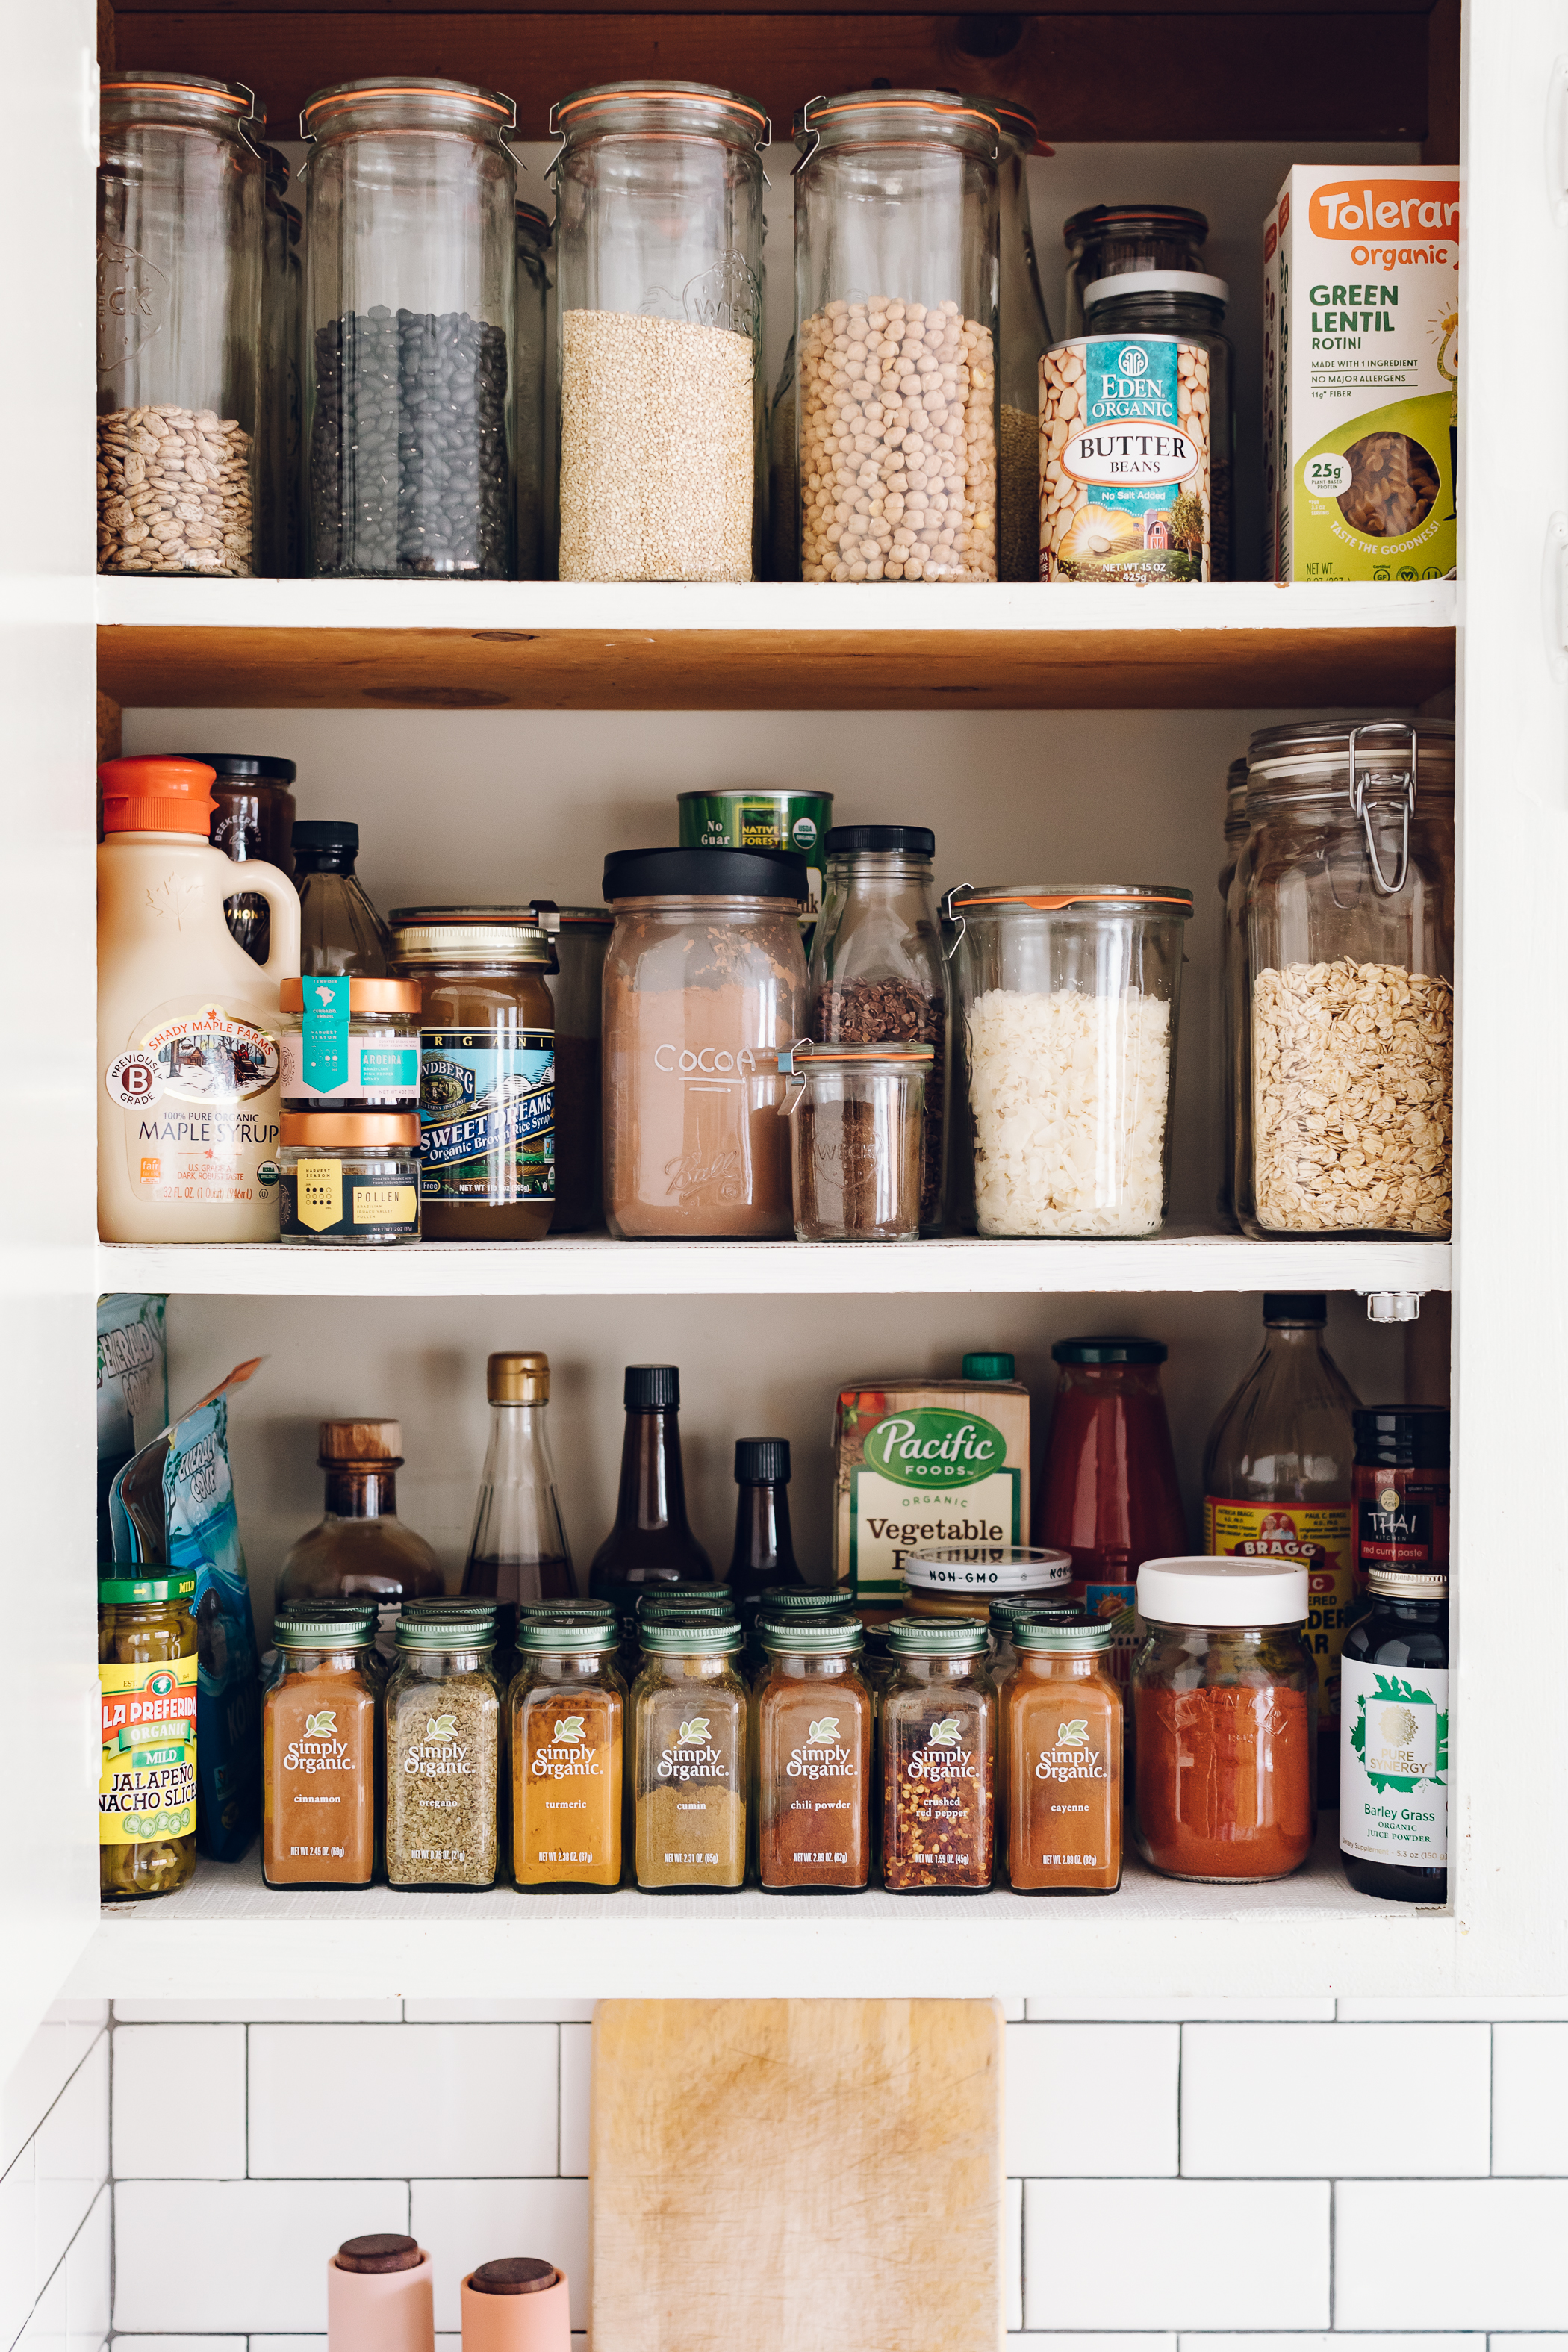 https://images.squarespace-cdn.com/content/v1/5ade3cbfb10598dd7a26c513/1561492575559-MWKQIZ0I3163X0ILTDMH/Inside+My+Pantry+by+Jessie+May